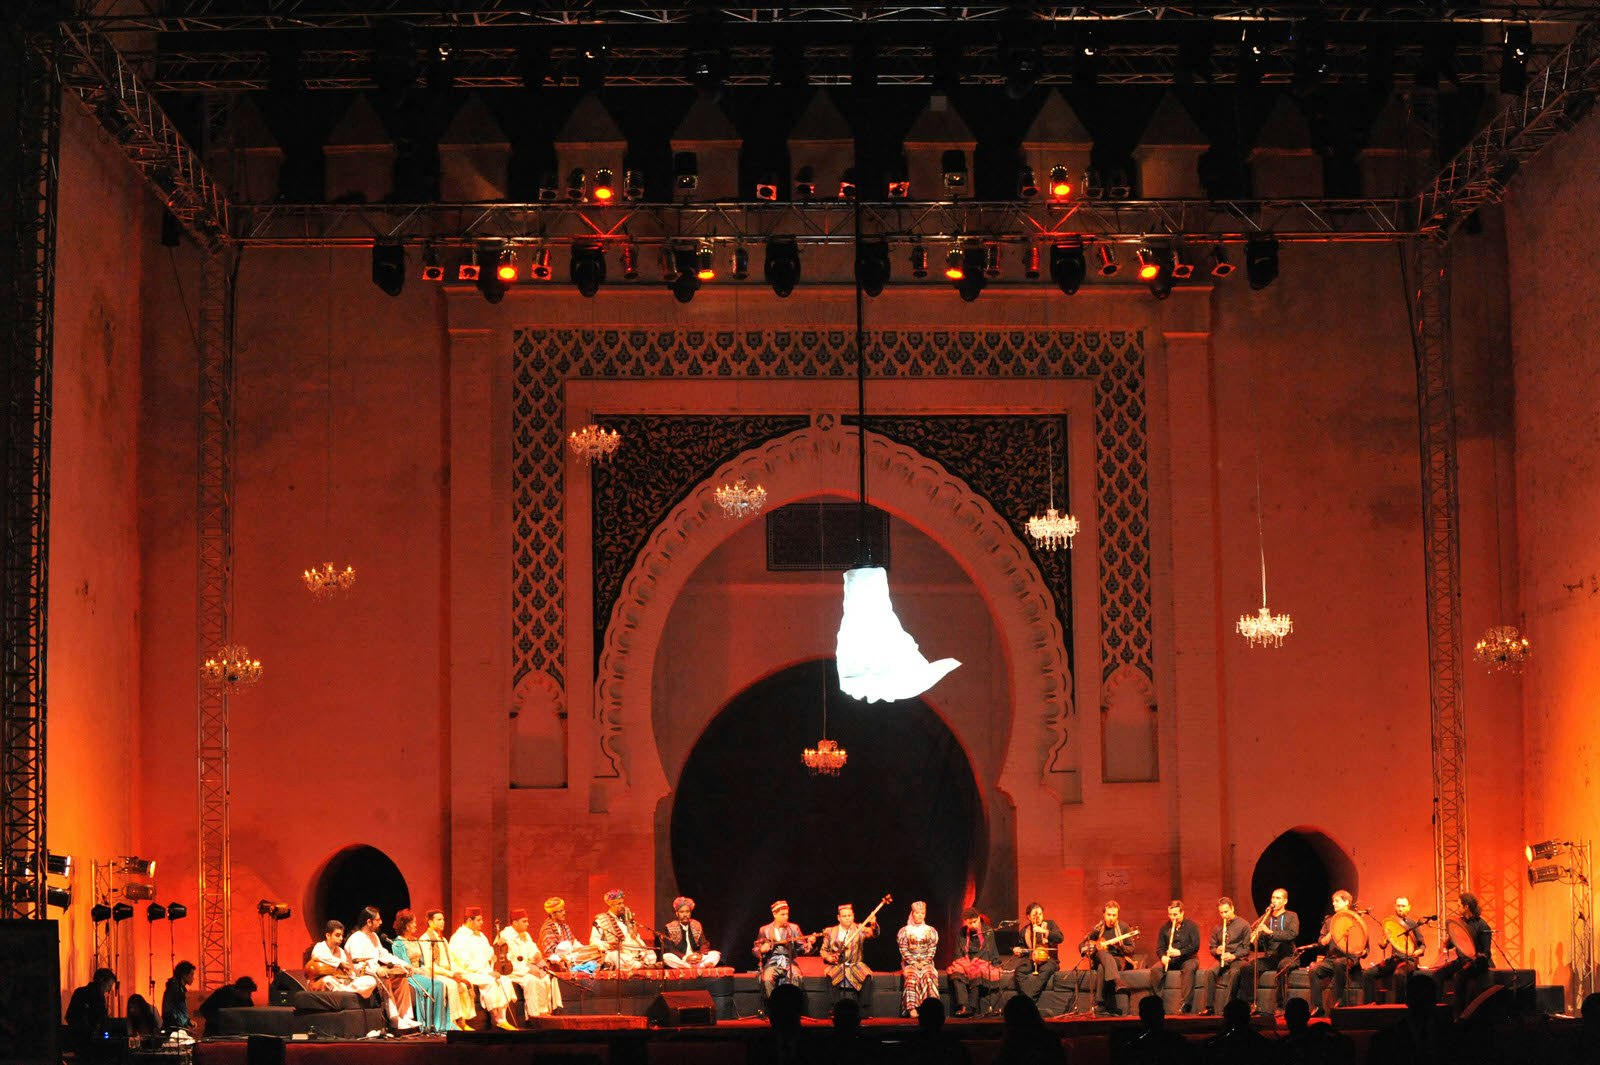 Fes Festival of World Sacred Music - A tribute show to Persian poet Omar Khayyam is played during the opening ceremony of the 18th World Sacred Music Festival in Fez, Morocco